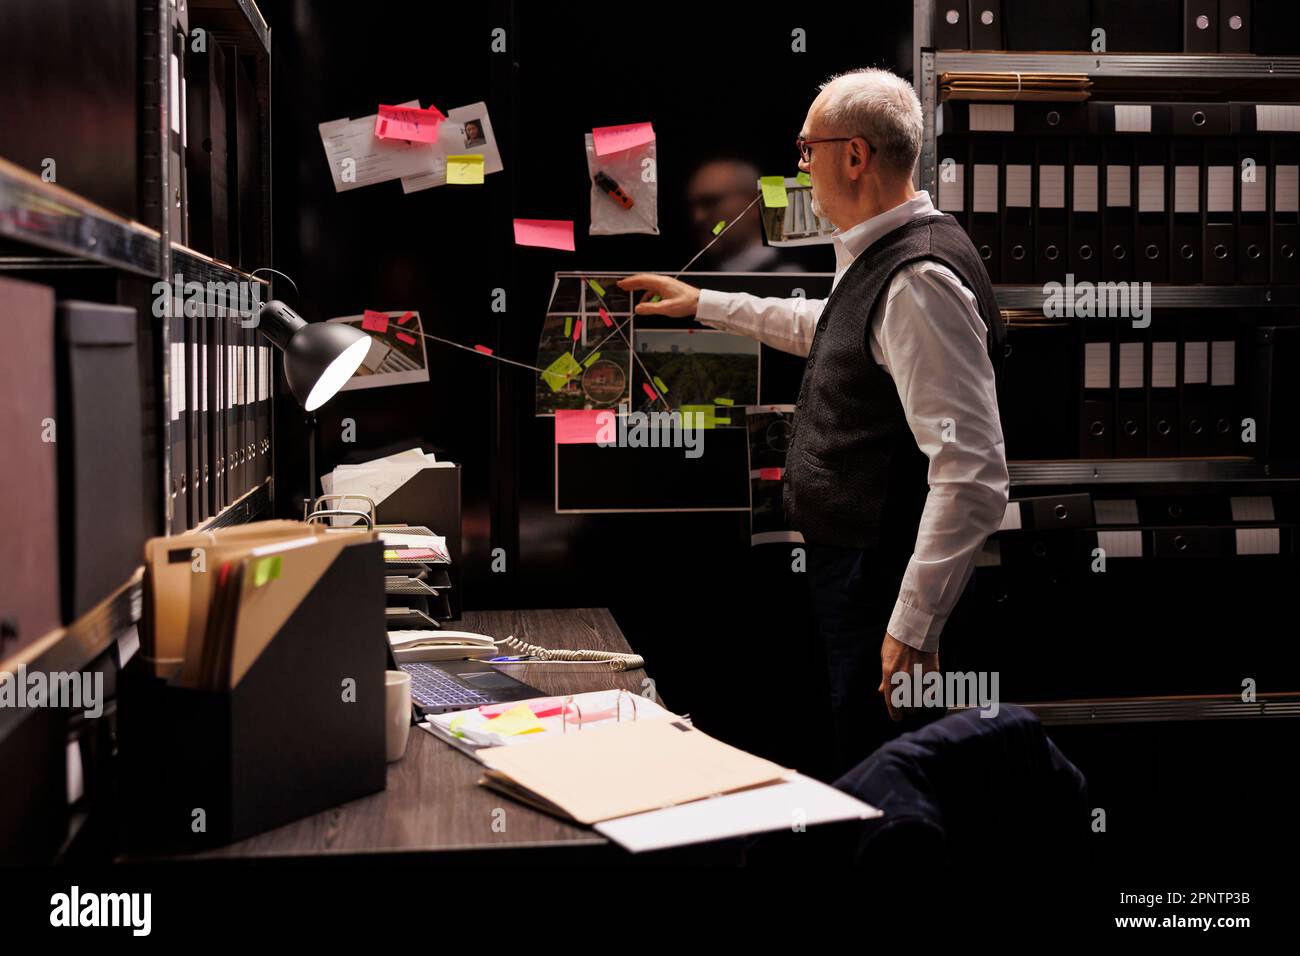 Elderly private detective checking federal investigation files, working overtime at criminal case in arhive room. Senior police officer analyzing crime scene evidence, looking at suspect report Stock Photo